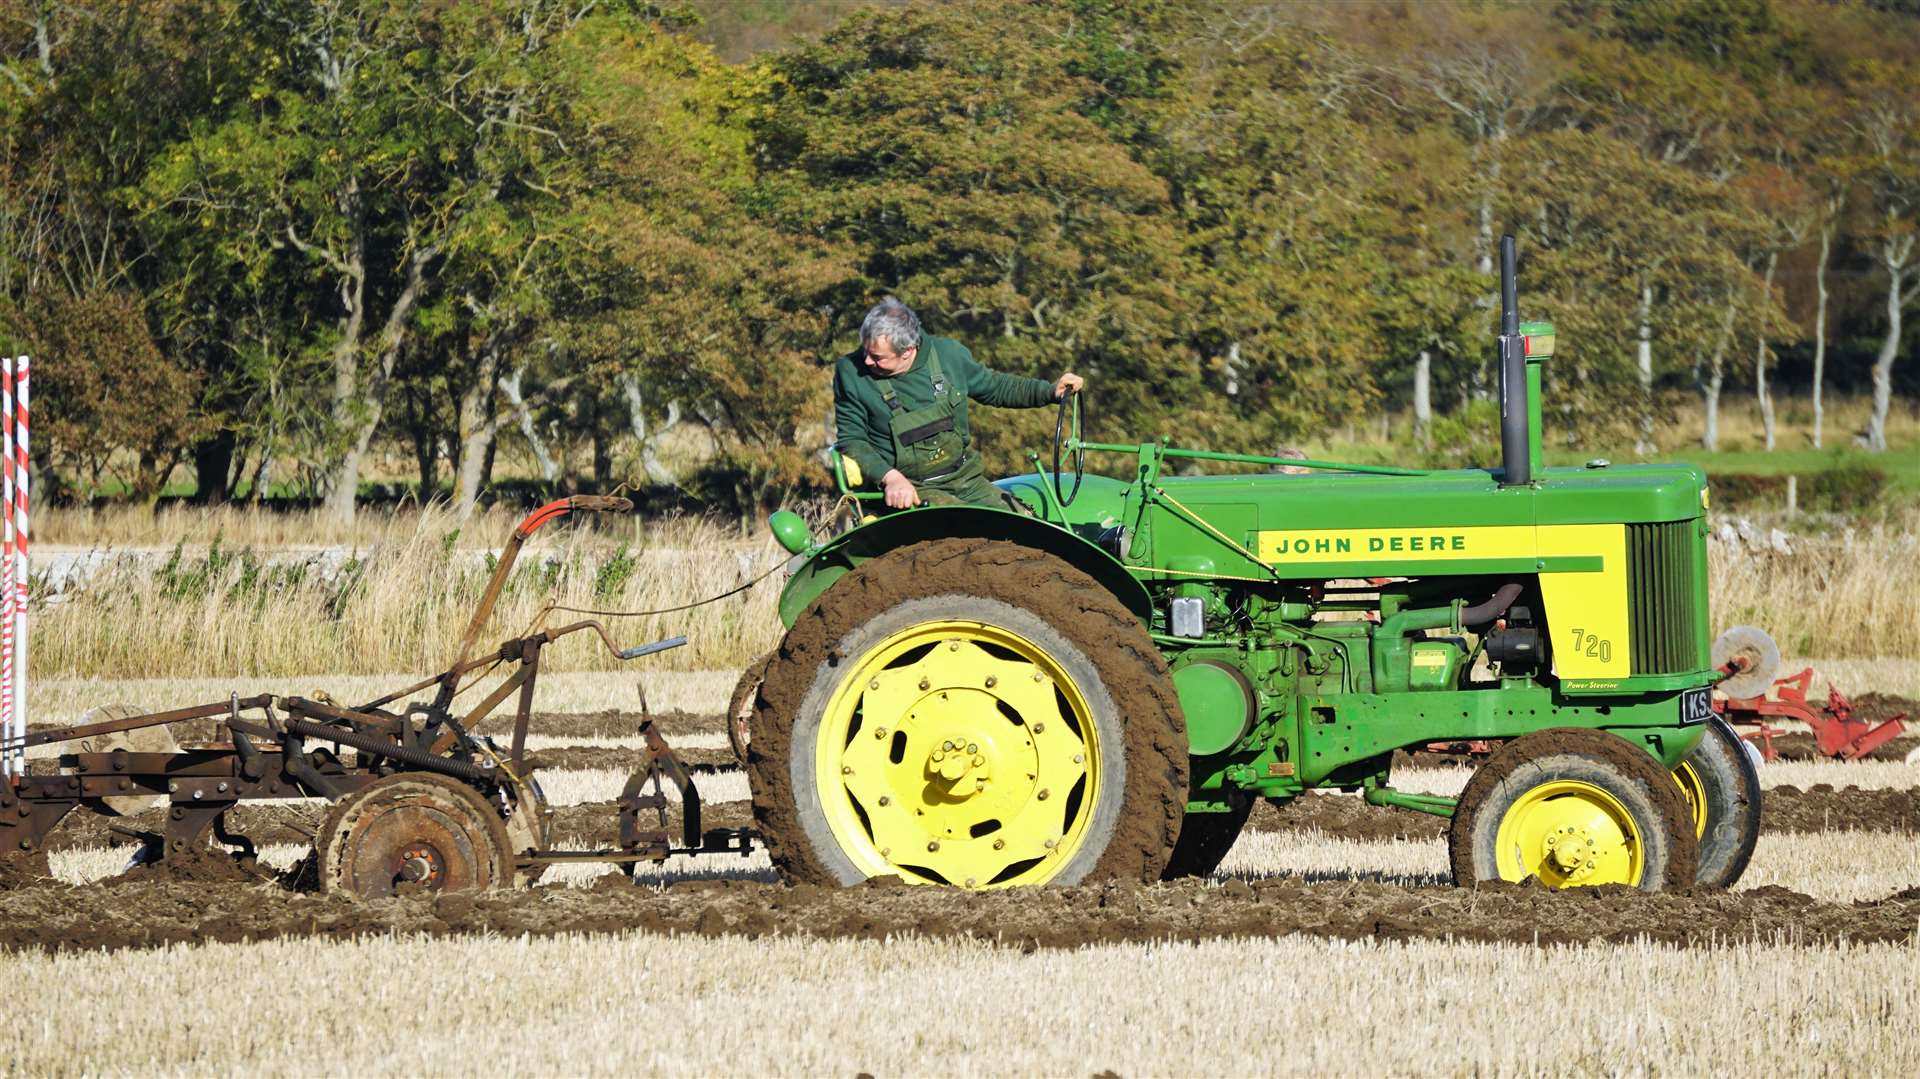 George Williamson from Dixonfield on a John Deere tractor with a John Deere plough. Picture: DGS